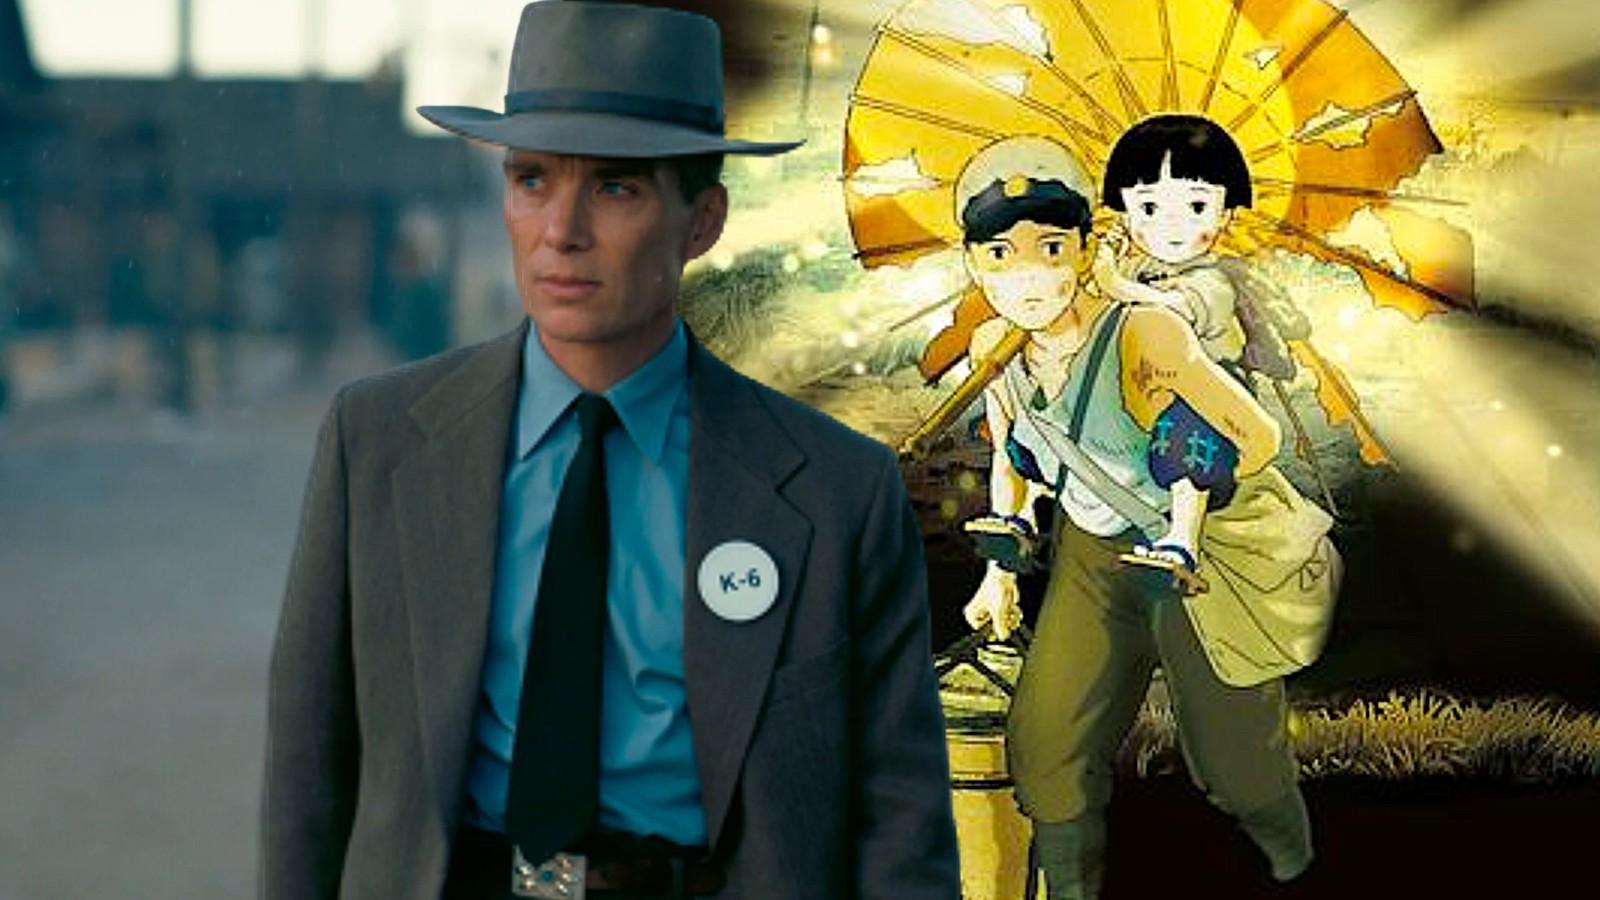 Cillian Murphy as Oppenheimer and a still from Grave of the Fireflies, two of the best war movies of all time